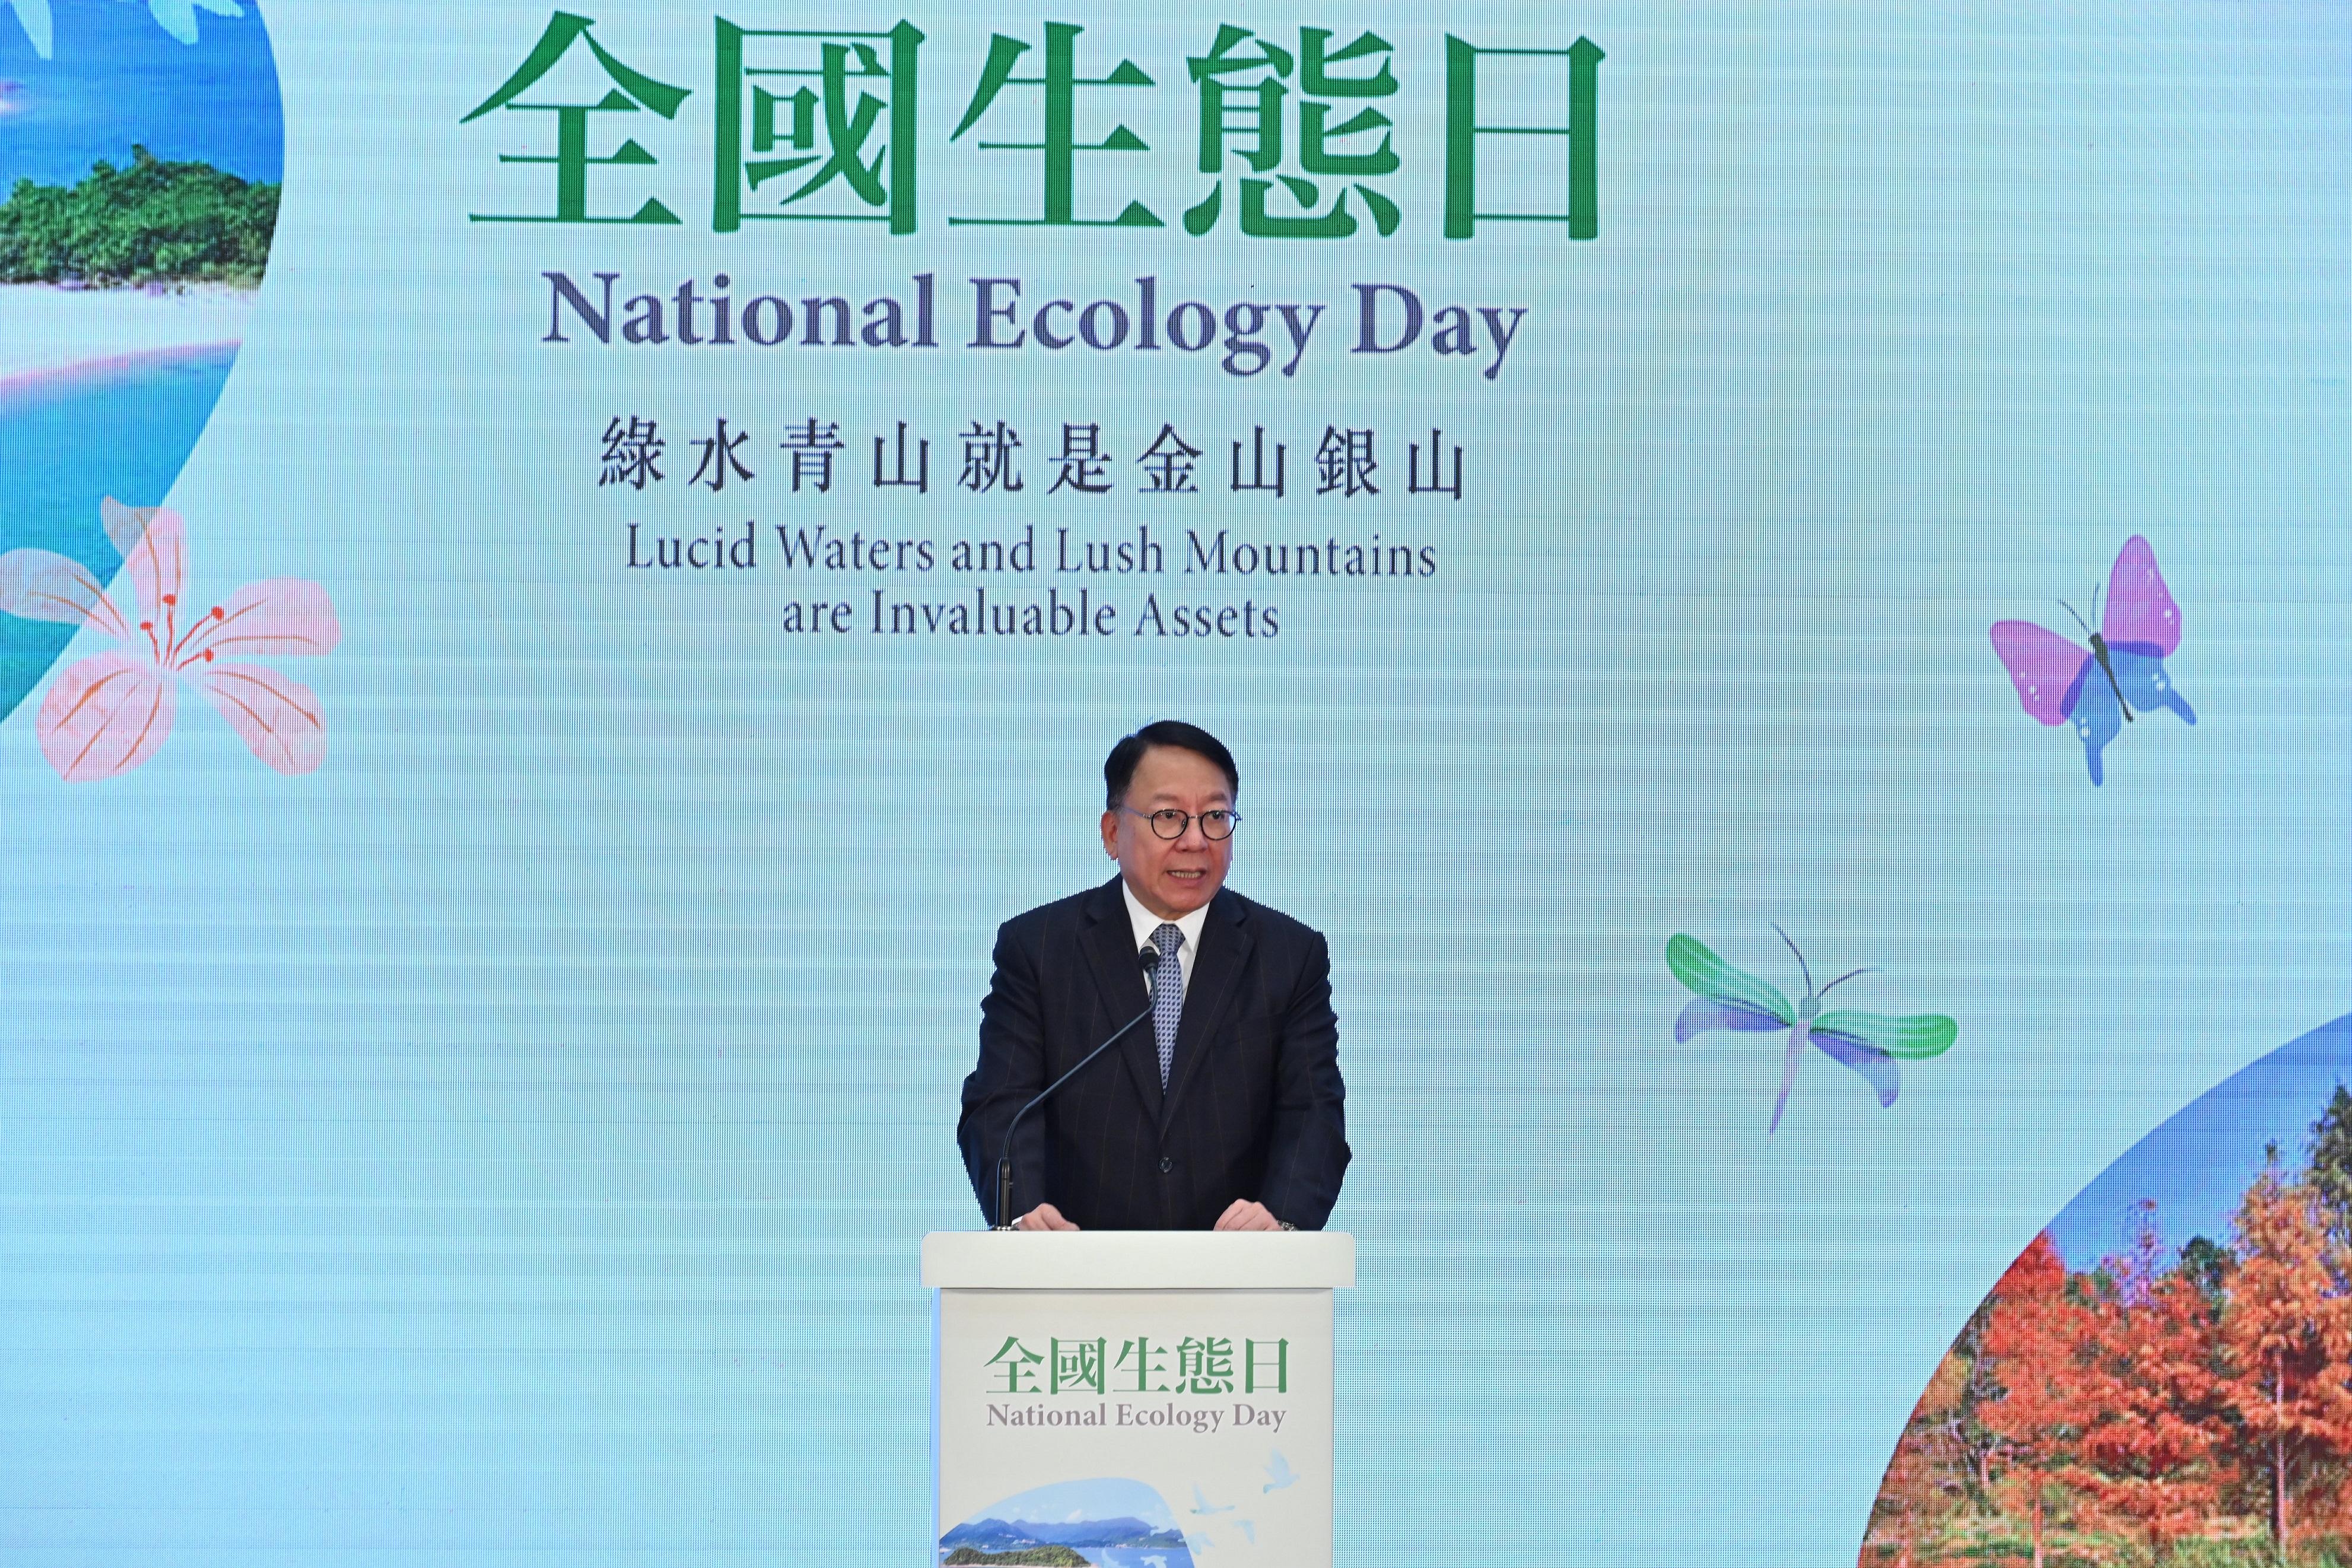 The Chief Secretary for Administration, Mr Chan Kwok-ki, delivers an opening speech at the National Ecology Day Launching Ceremony today (August 15).